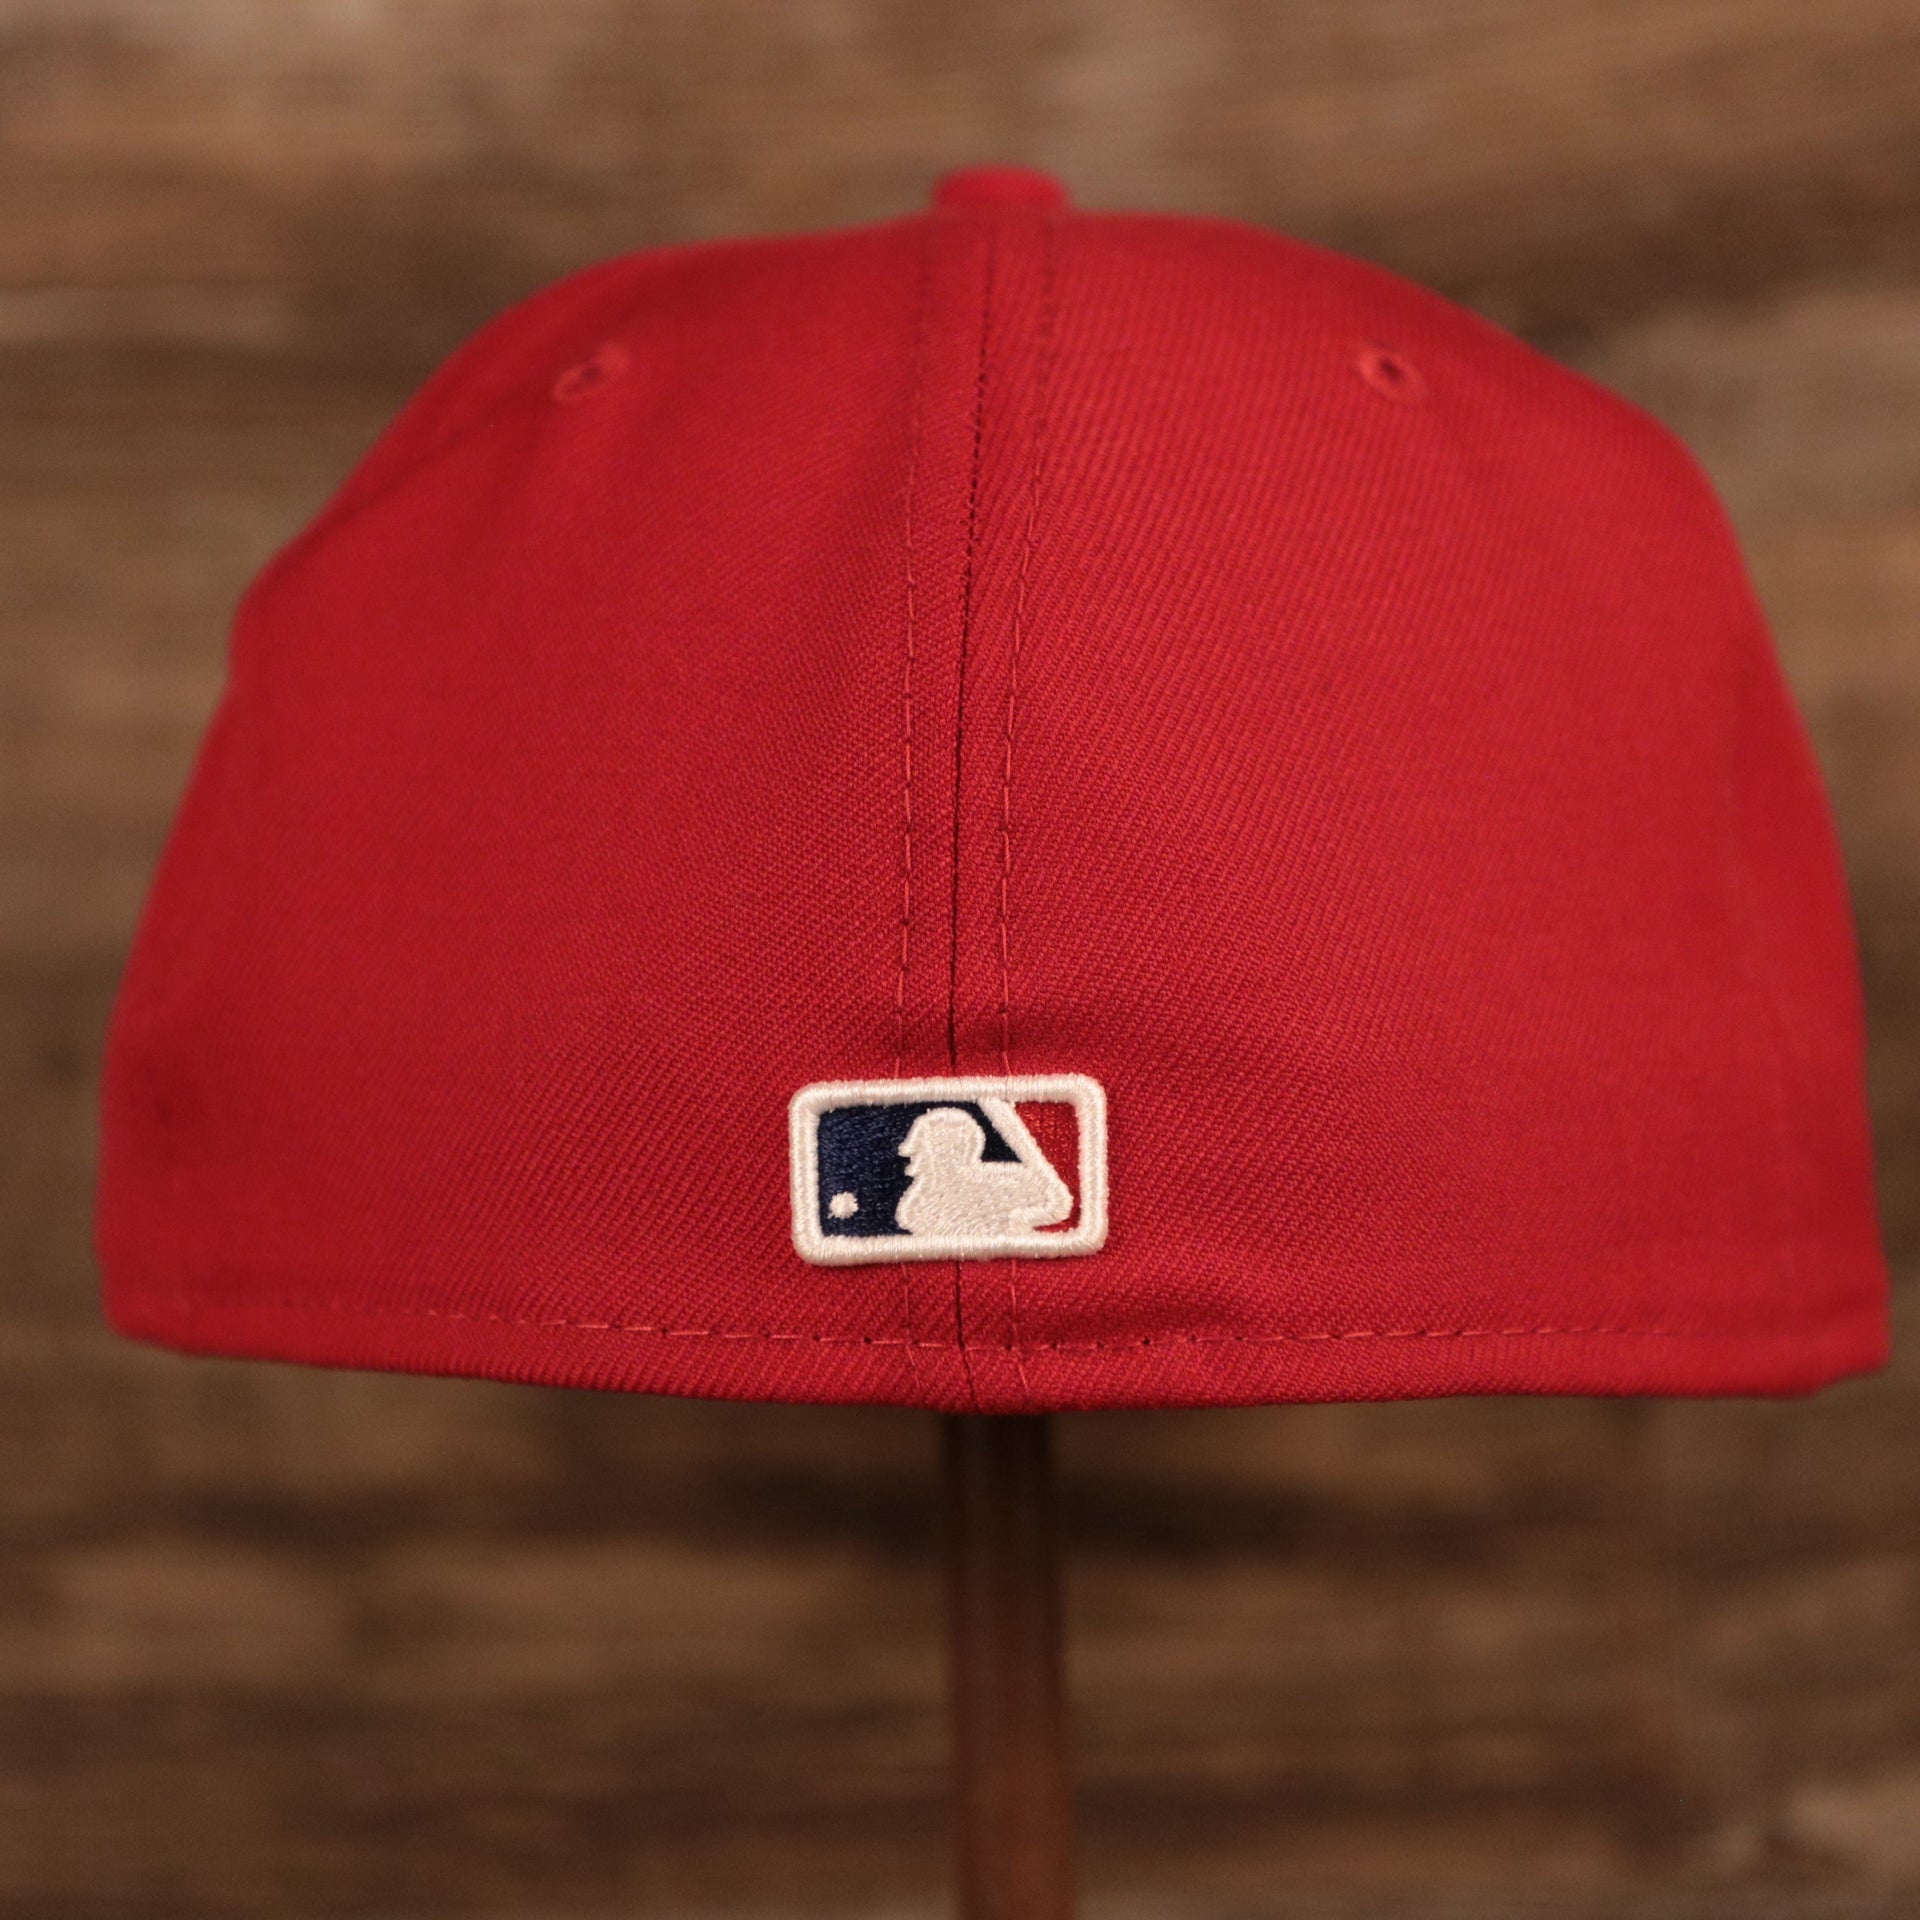 The MLB logo on the back side of the red Philadelphia Phillies Philly Cheesesteak 59fifty grey bottom fitted cap.